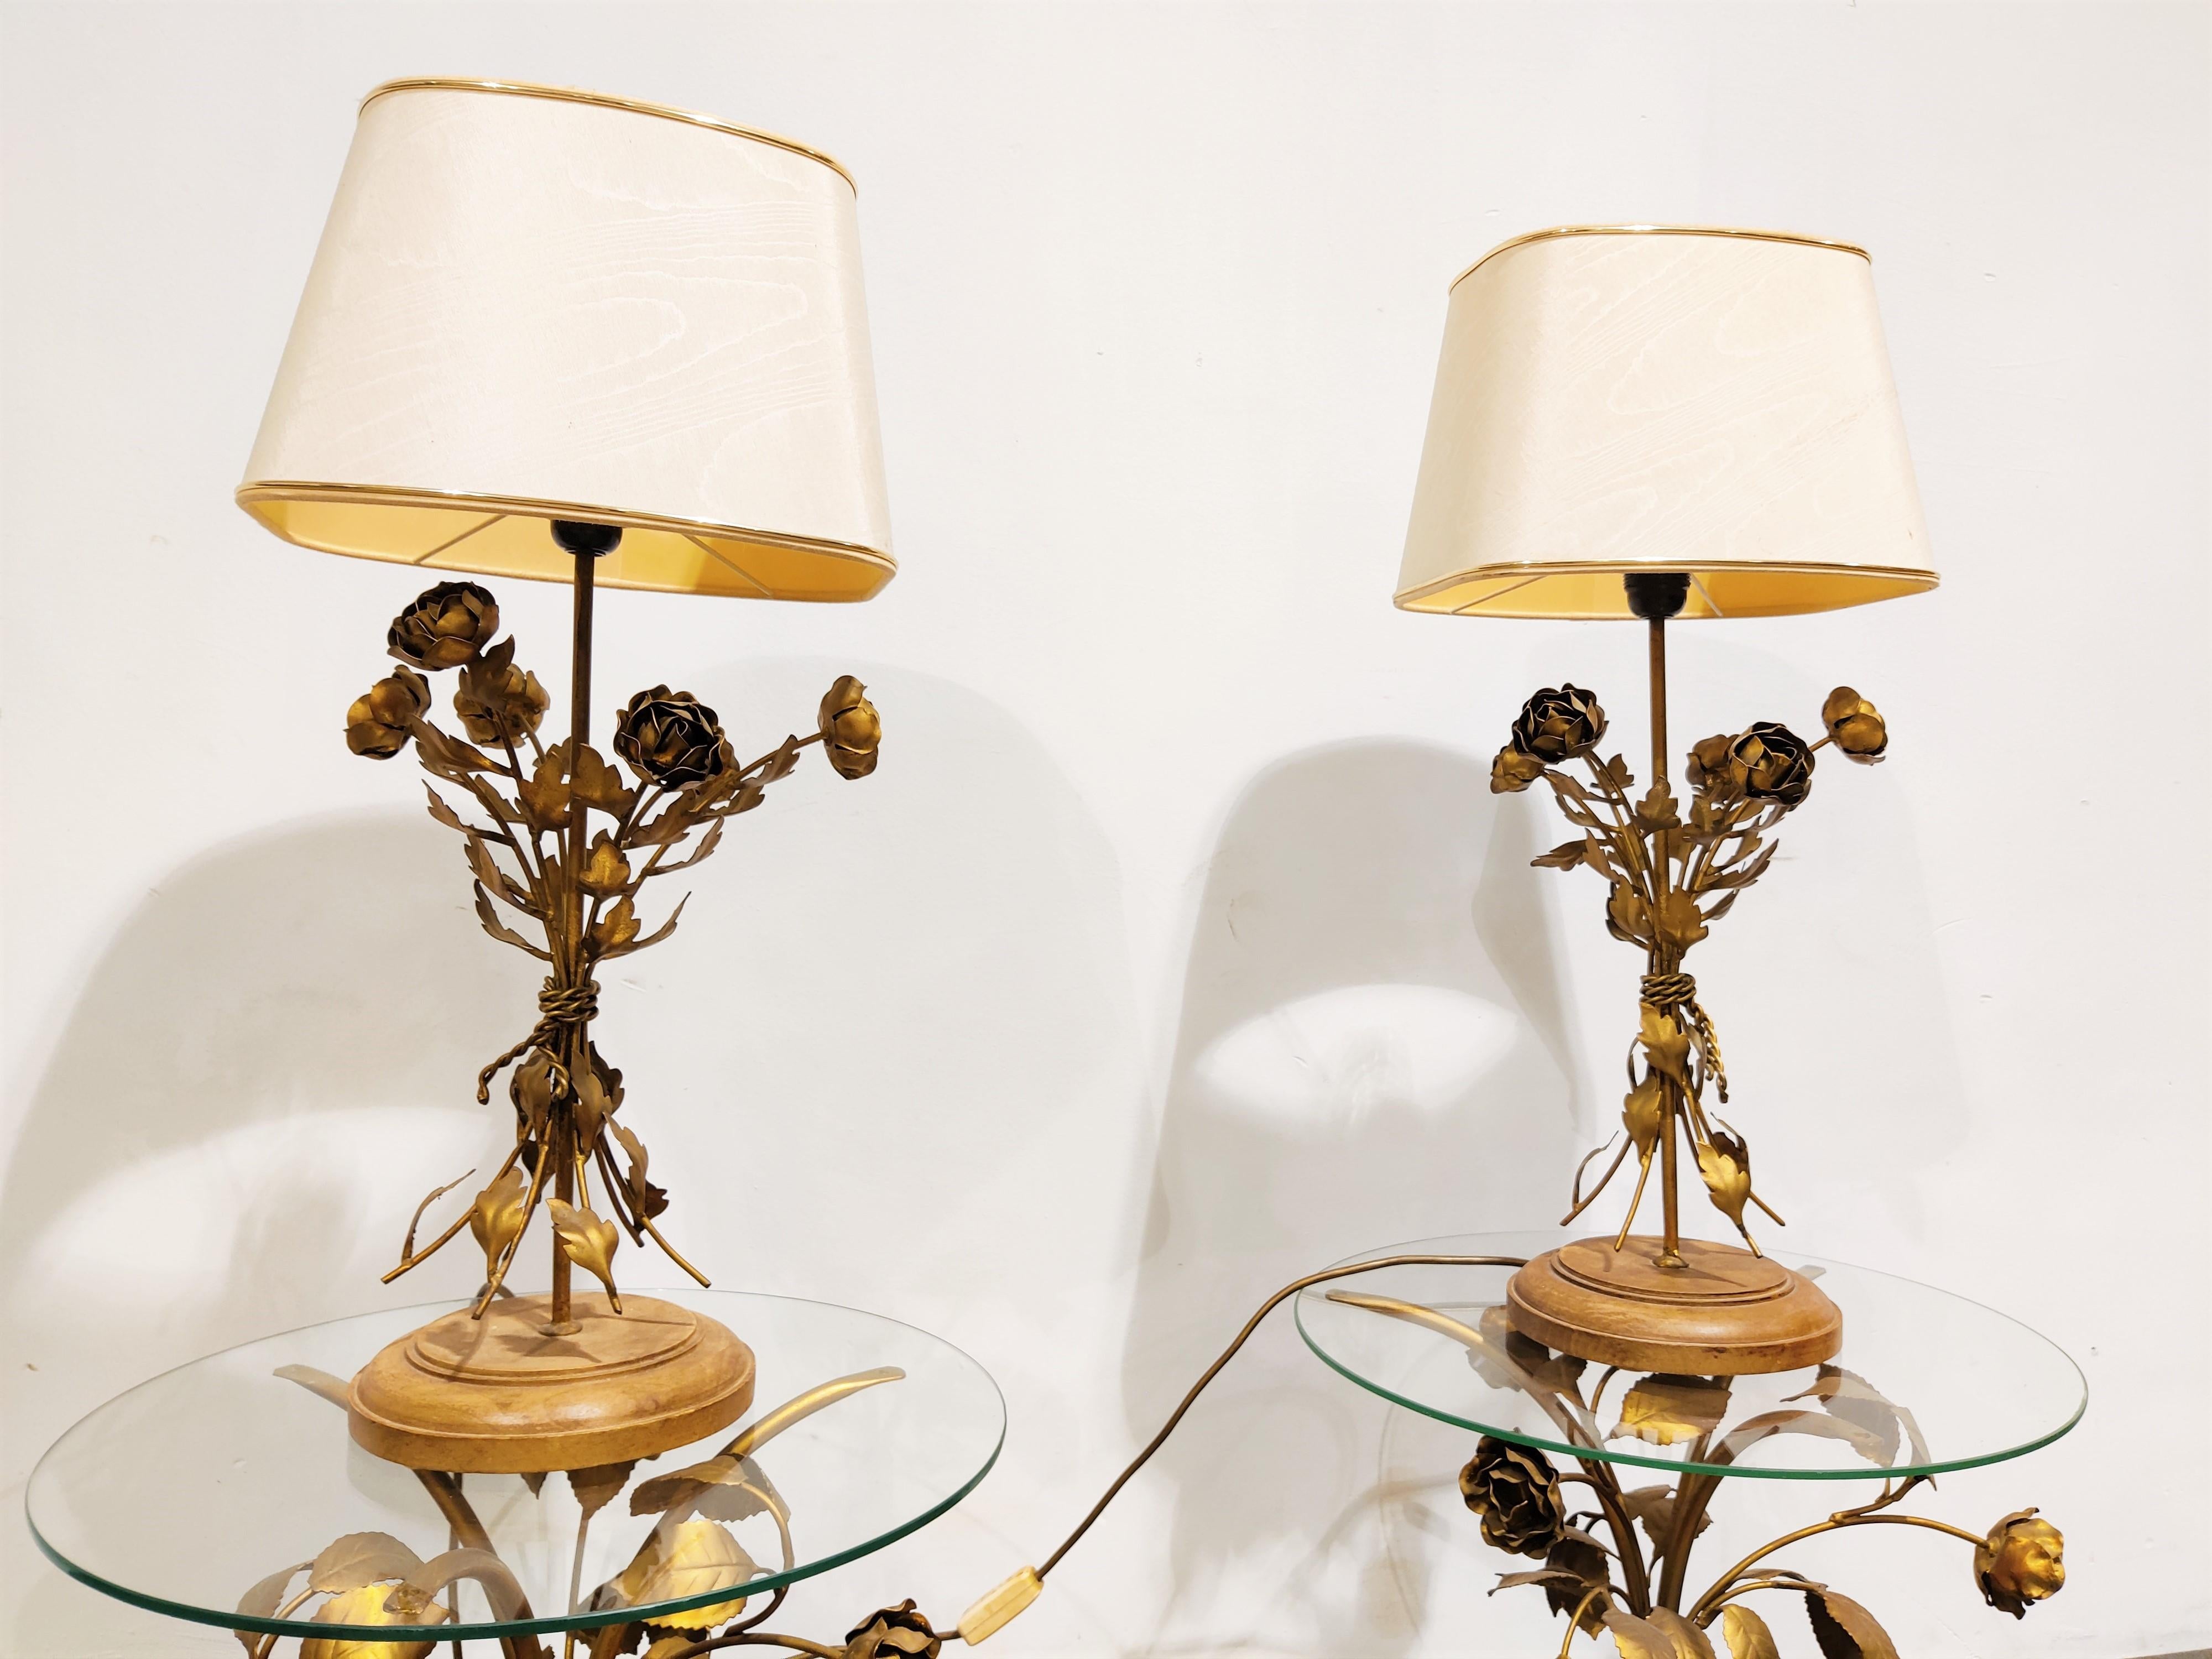 Mid century floral table lamps made from gilt metal.

Nicely detailed flowers.

Wooden base.

Tested and ready to use with a regular E27 light bulb.

Good condition.

1960s - Italy

Dimensions:
Height: 64cm/25.19